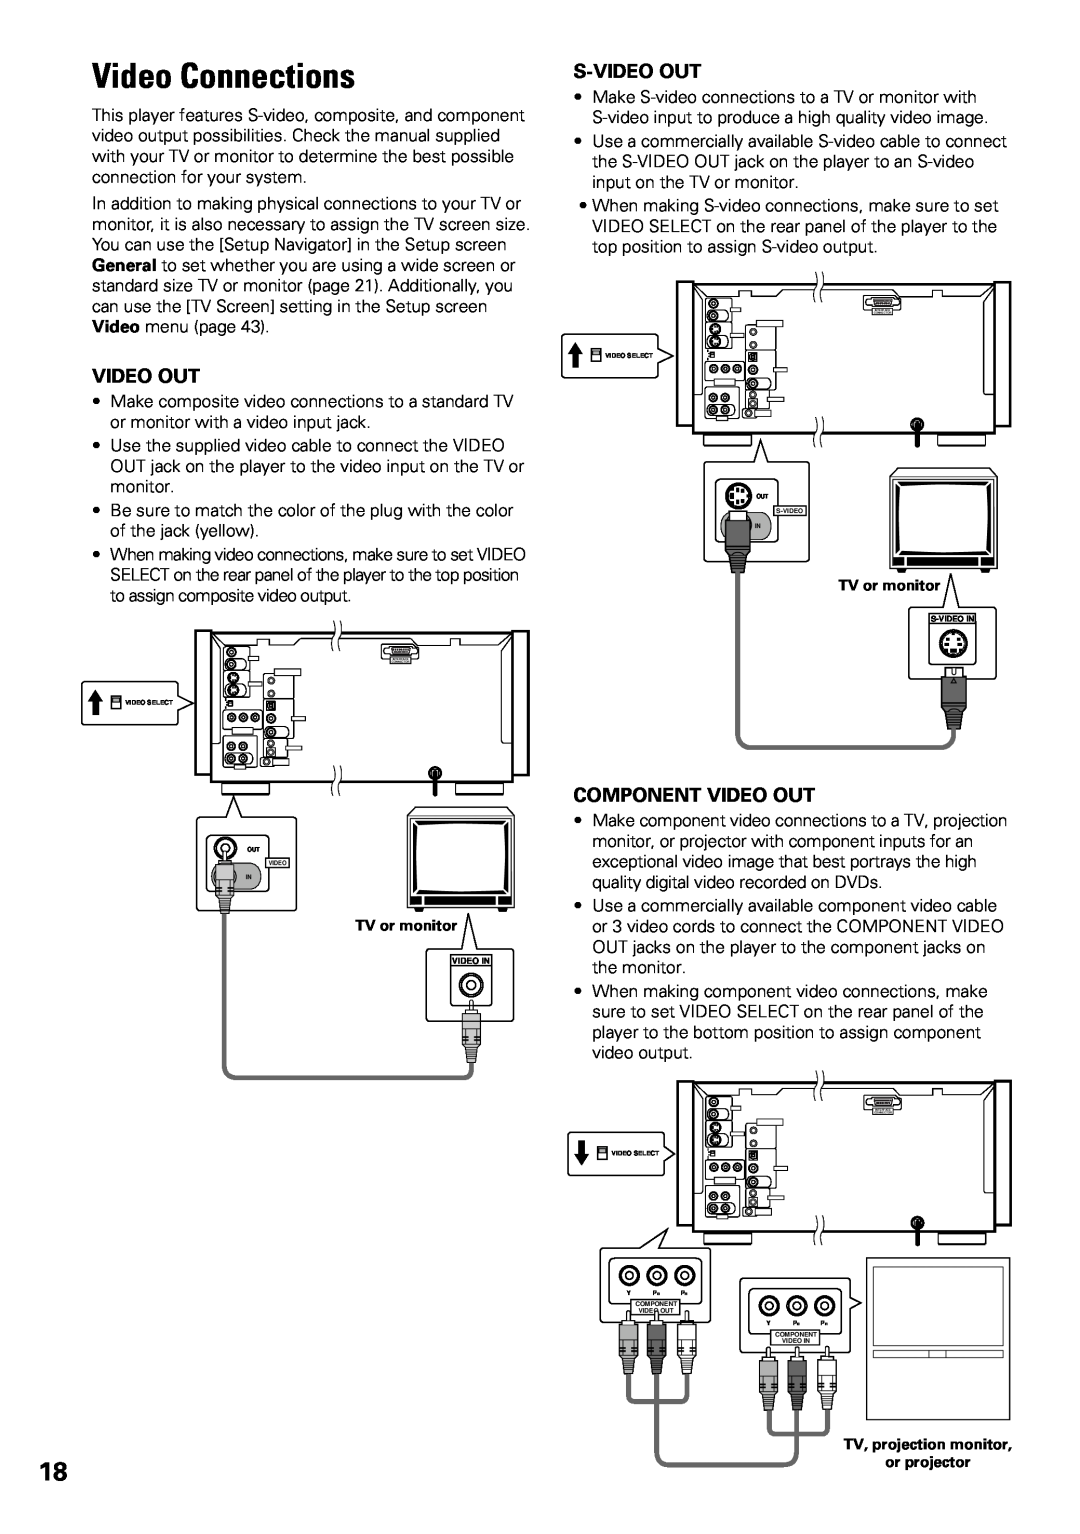 Pioneer DV-F07 operating instructions Video Connections, S-Video Out, Component Video Out 